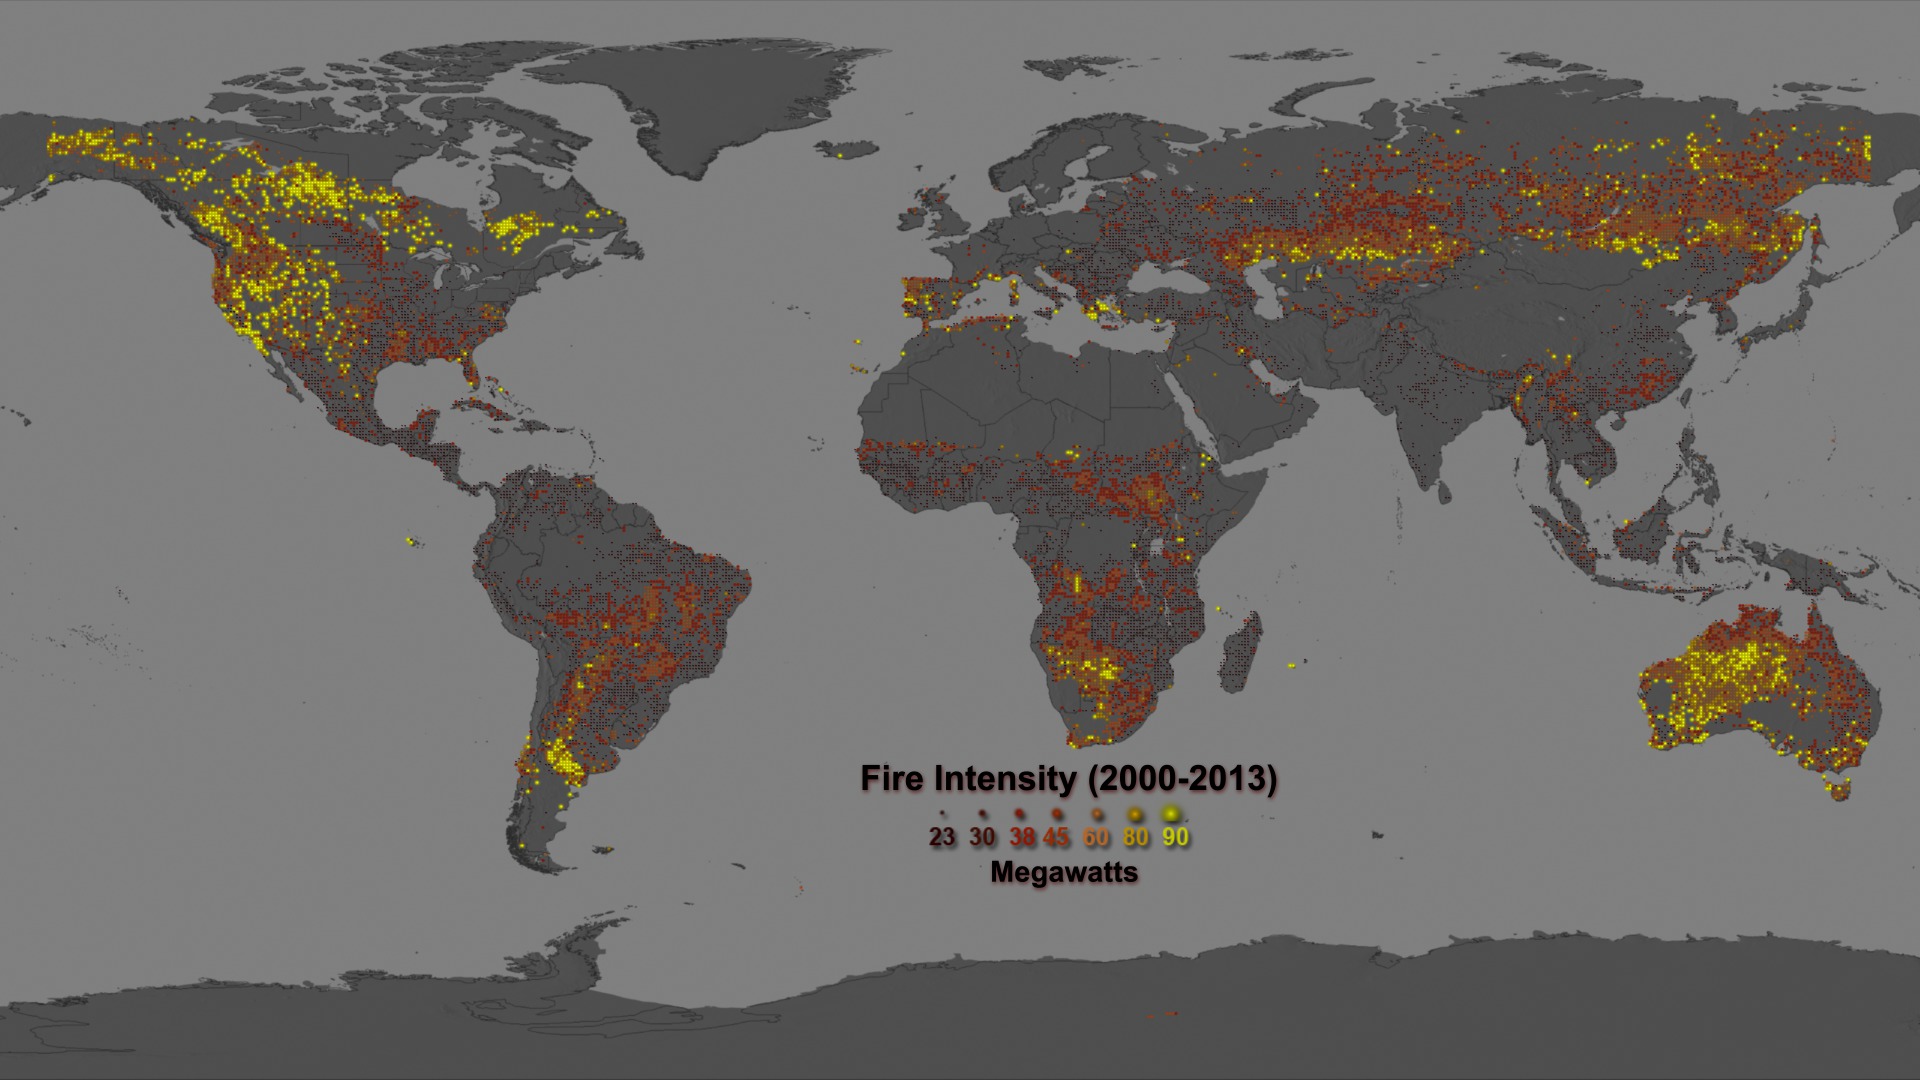  This visual shows the global view of Mean Fire Radiative Power (FRP) from the MODIS Climate Modeling Grid fire products. Agricultural and prescribed fires are shown in dark red. More intense fires are shown in orange. Regions where the gridded statistical summaries show the most intense fires are shown in bright yellow. 